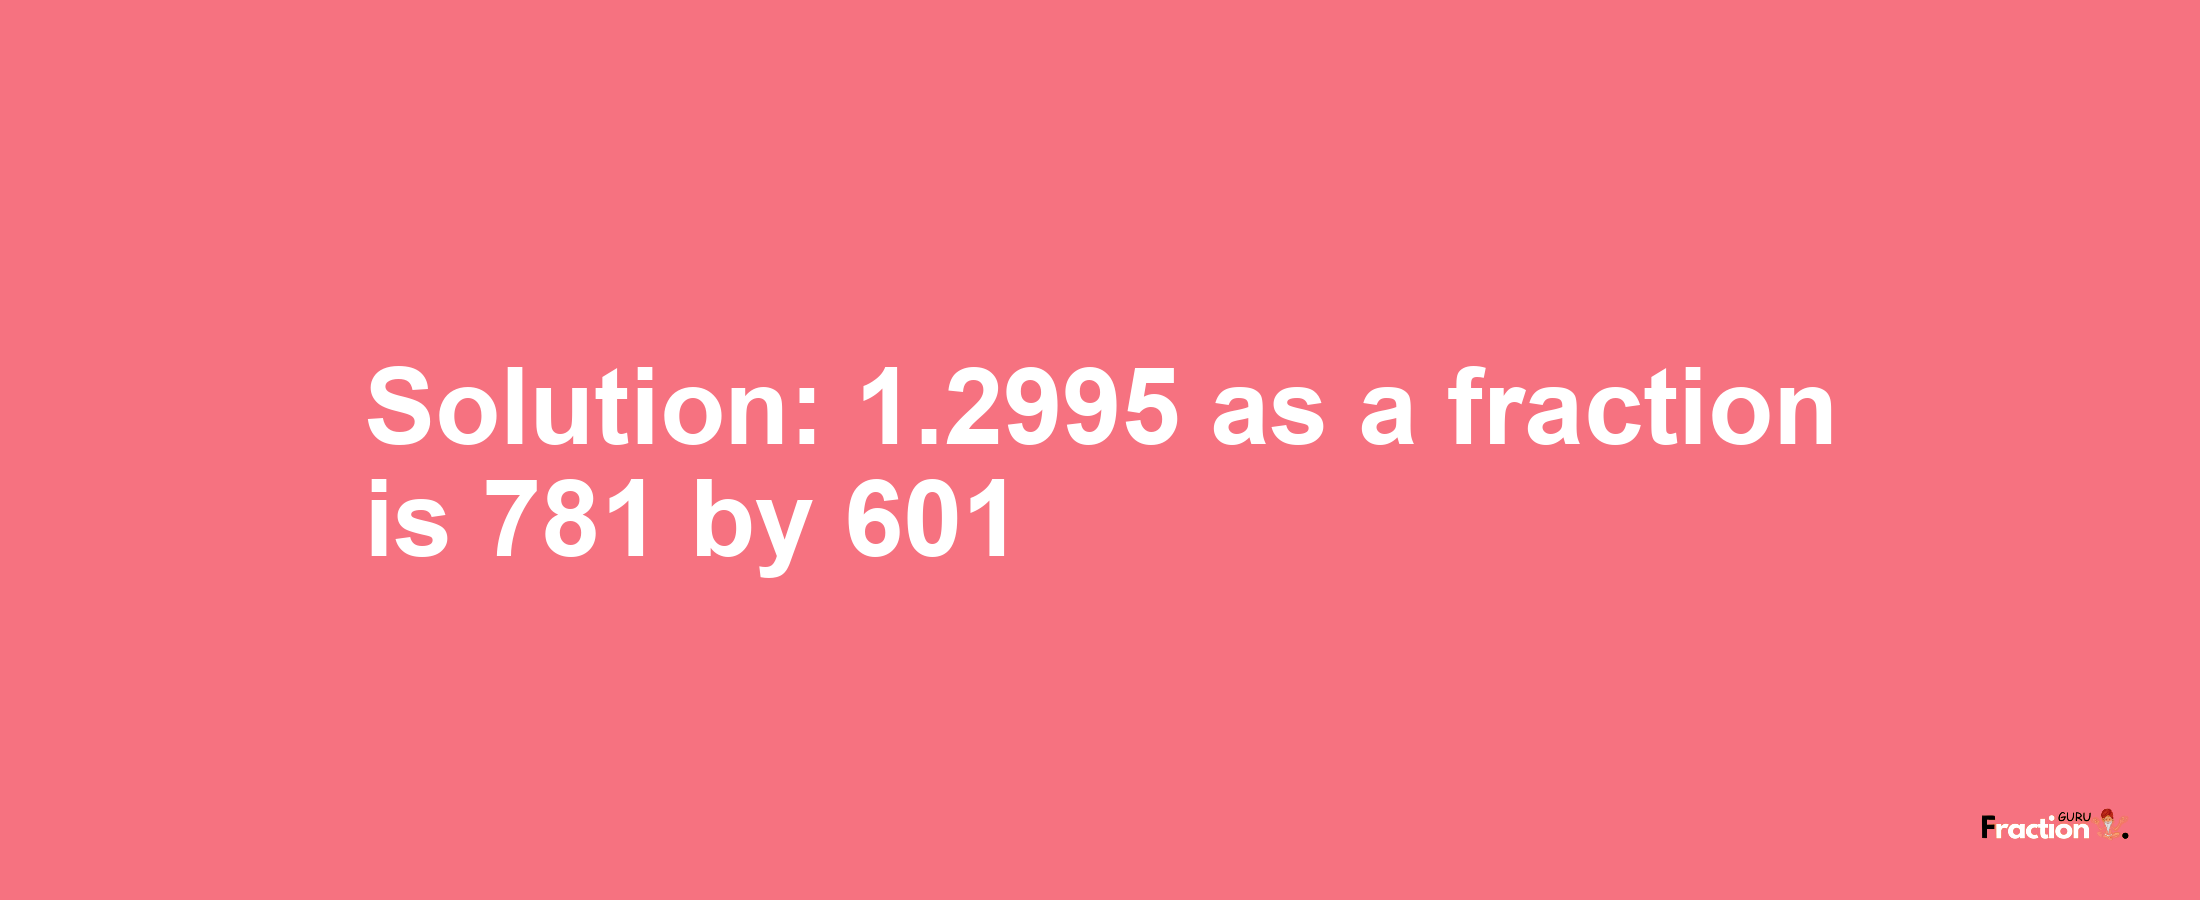 Solution:1.2995 as a fraction is 781/601